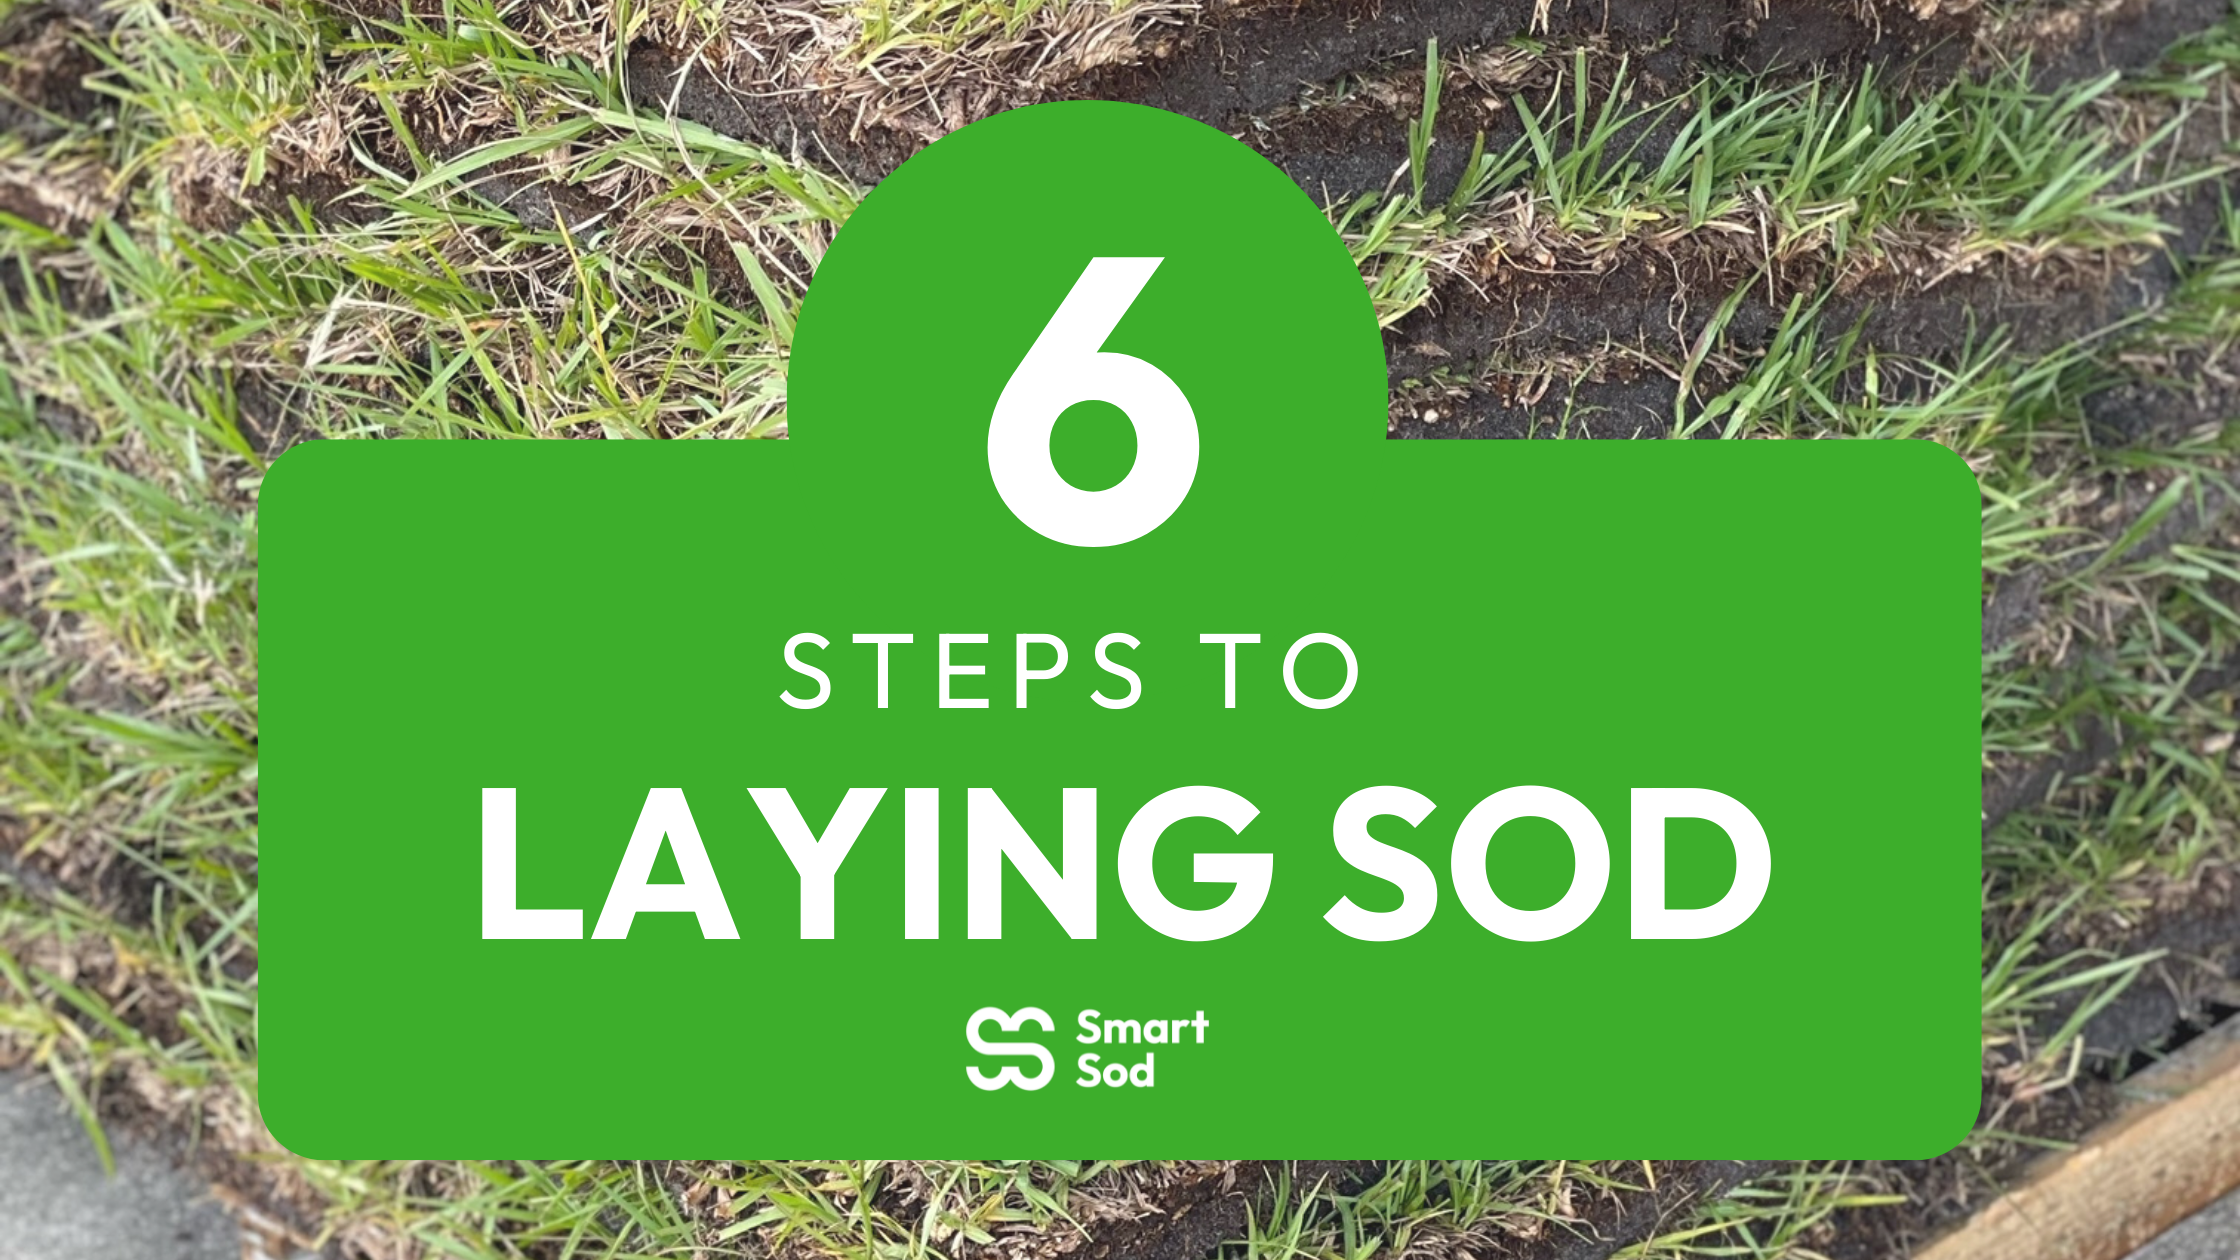 6 steps to laying sod